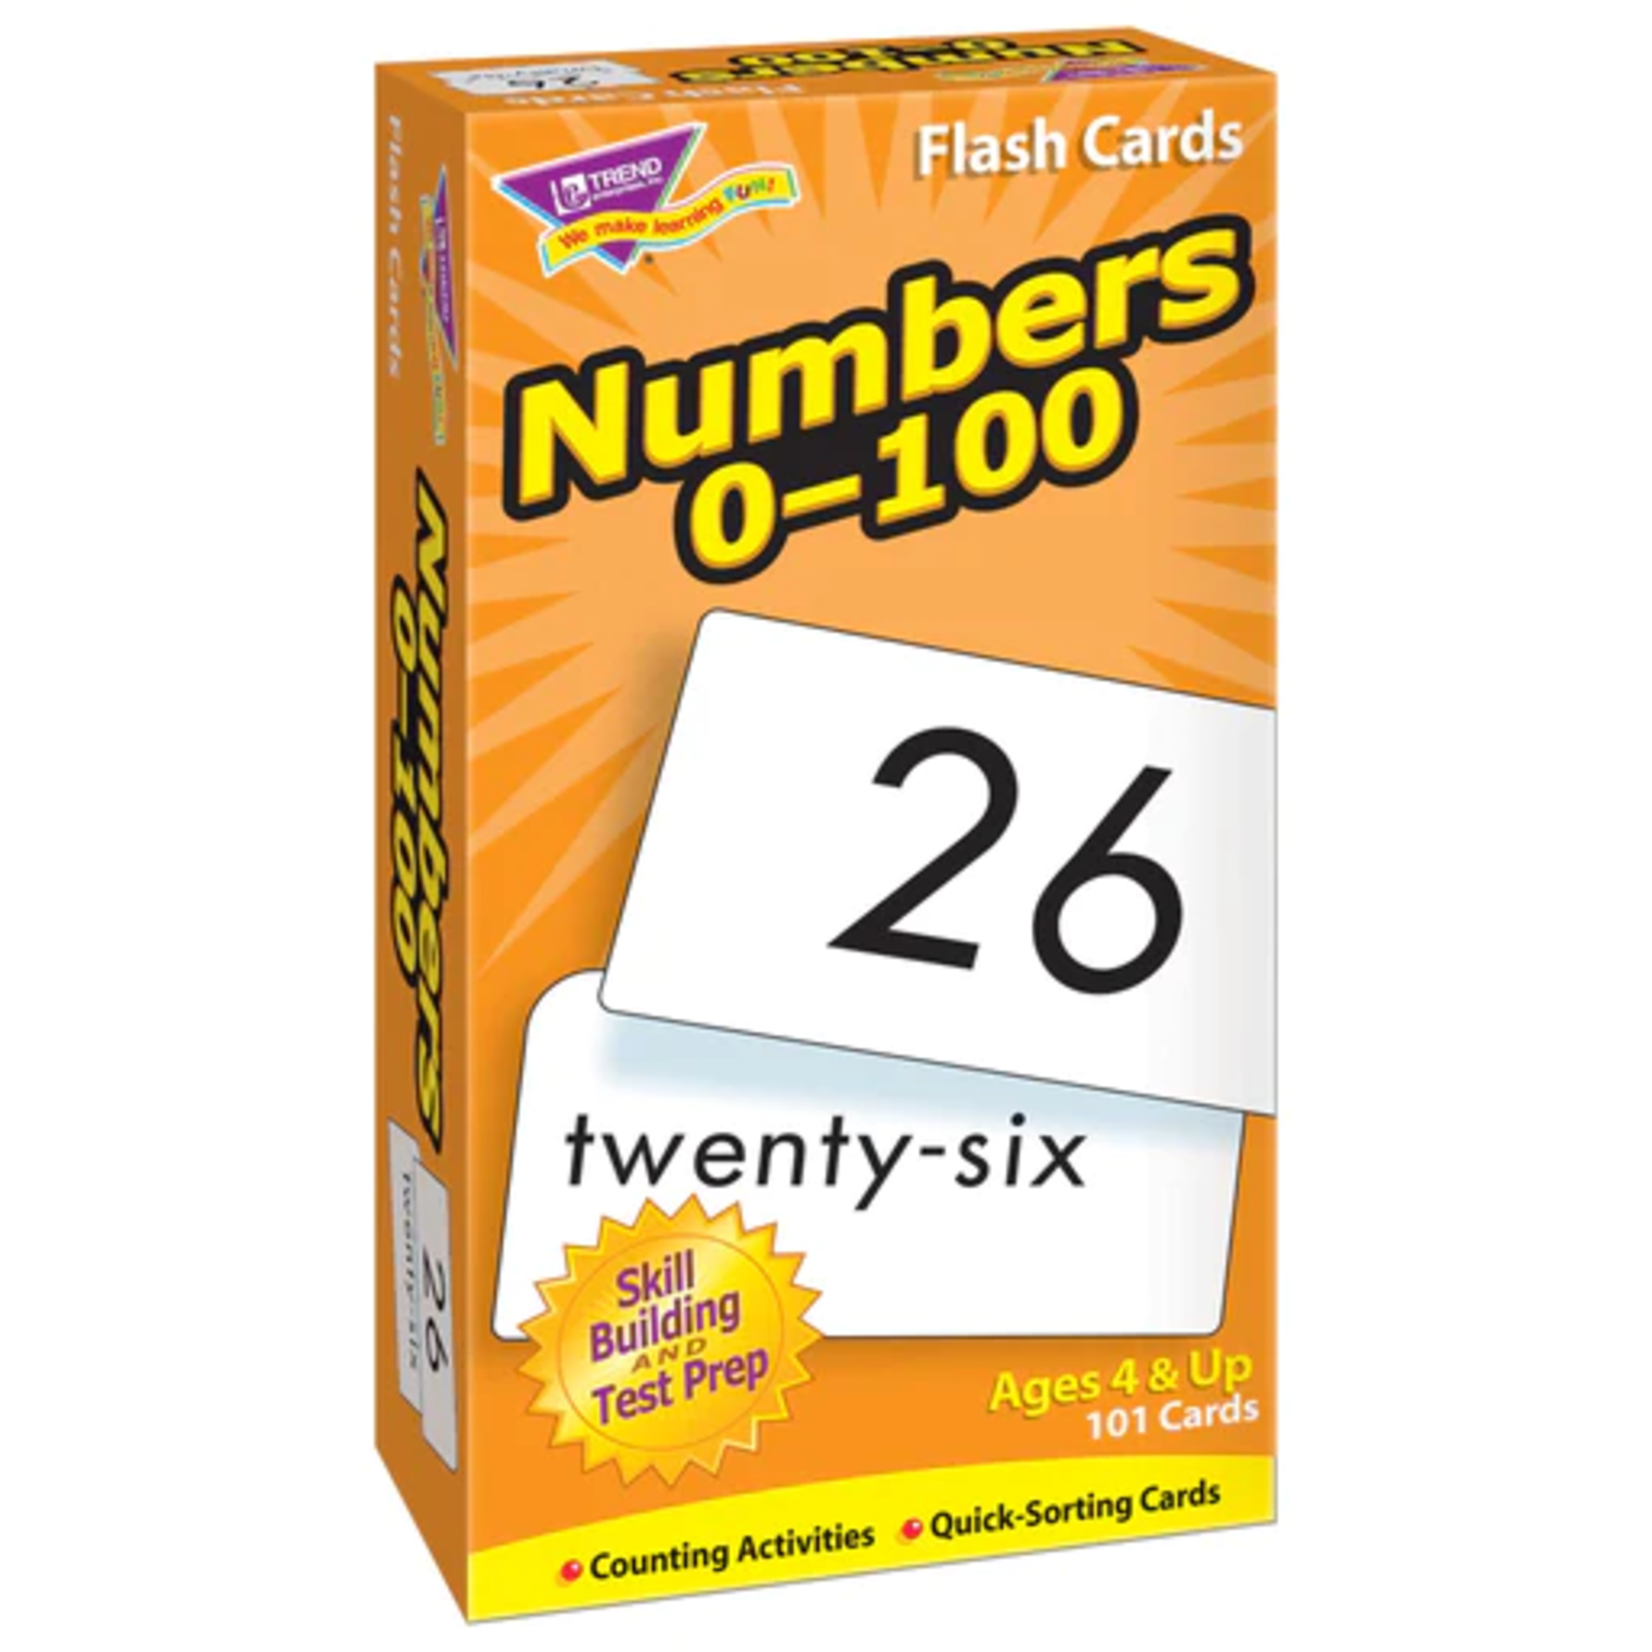 TREND ENTERPRISES INC Numbers 0-100 Skill Drill Flash Cards